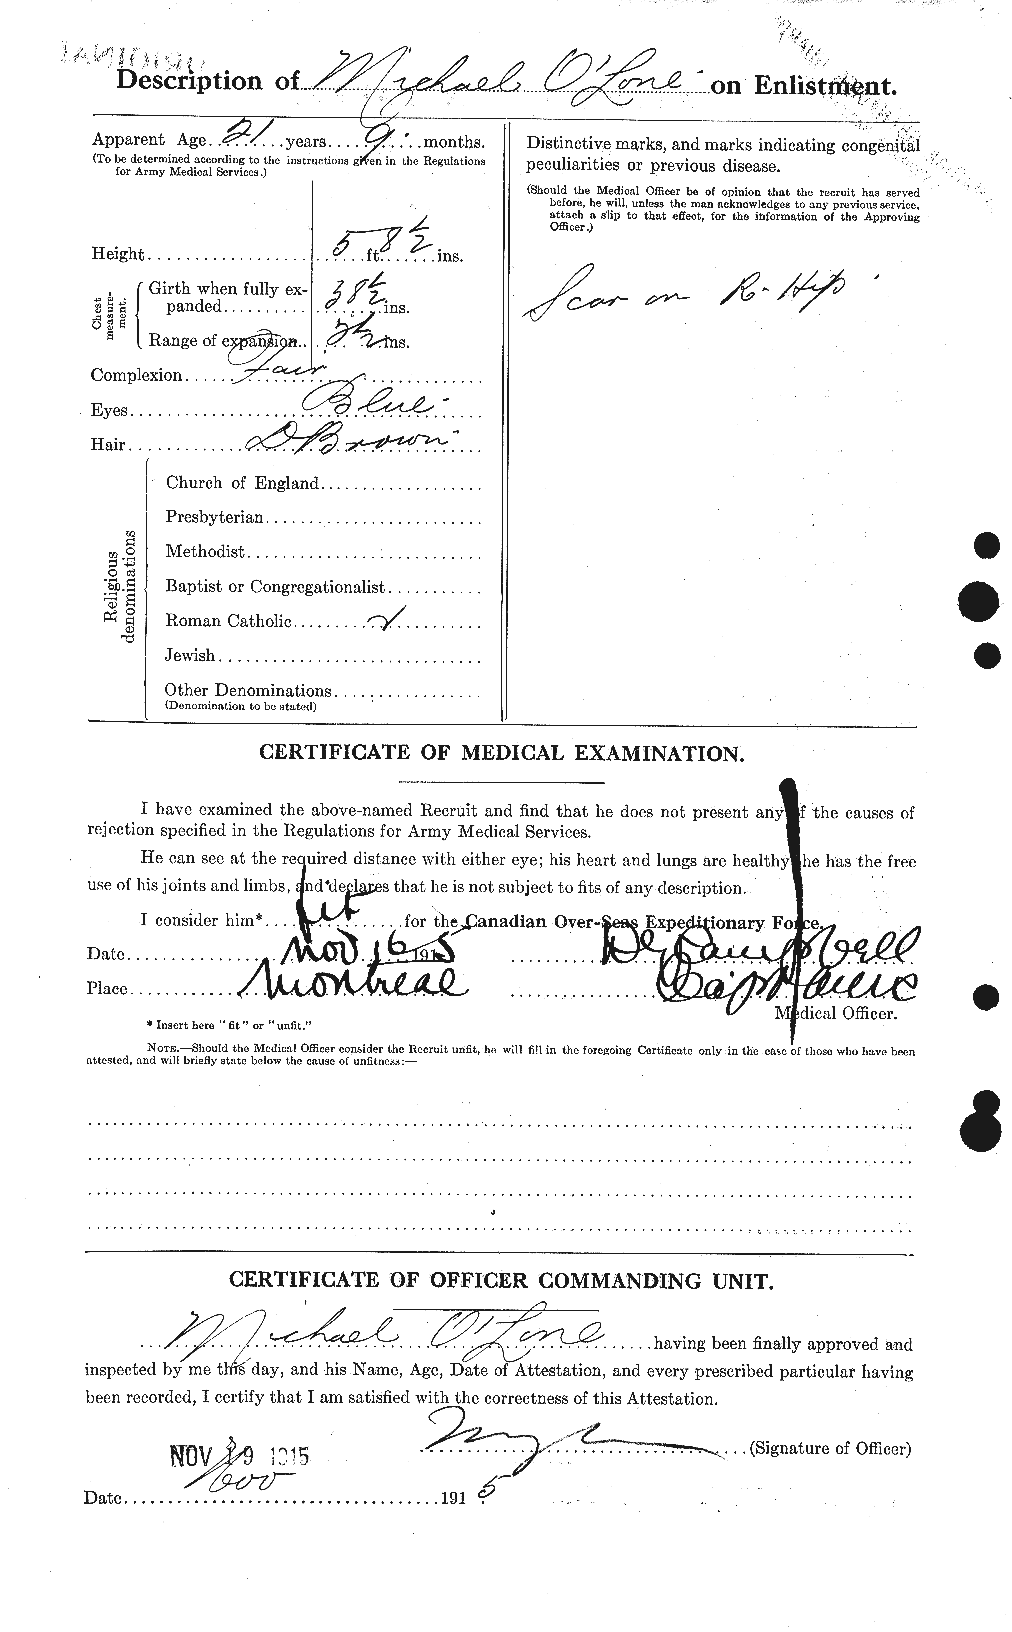 Personnel Records of the First World War - CEF 555728b